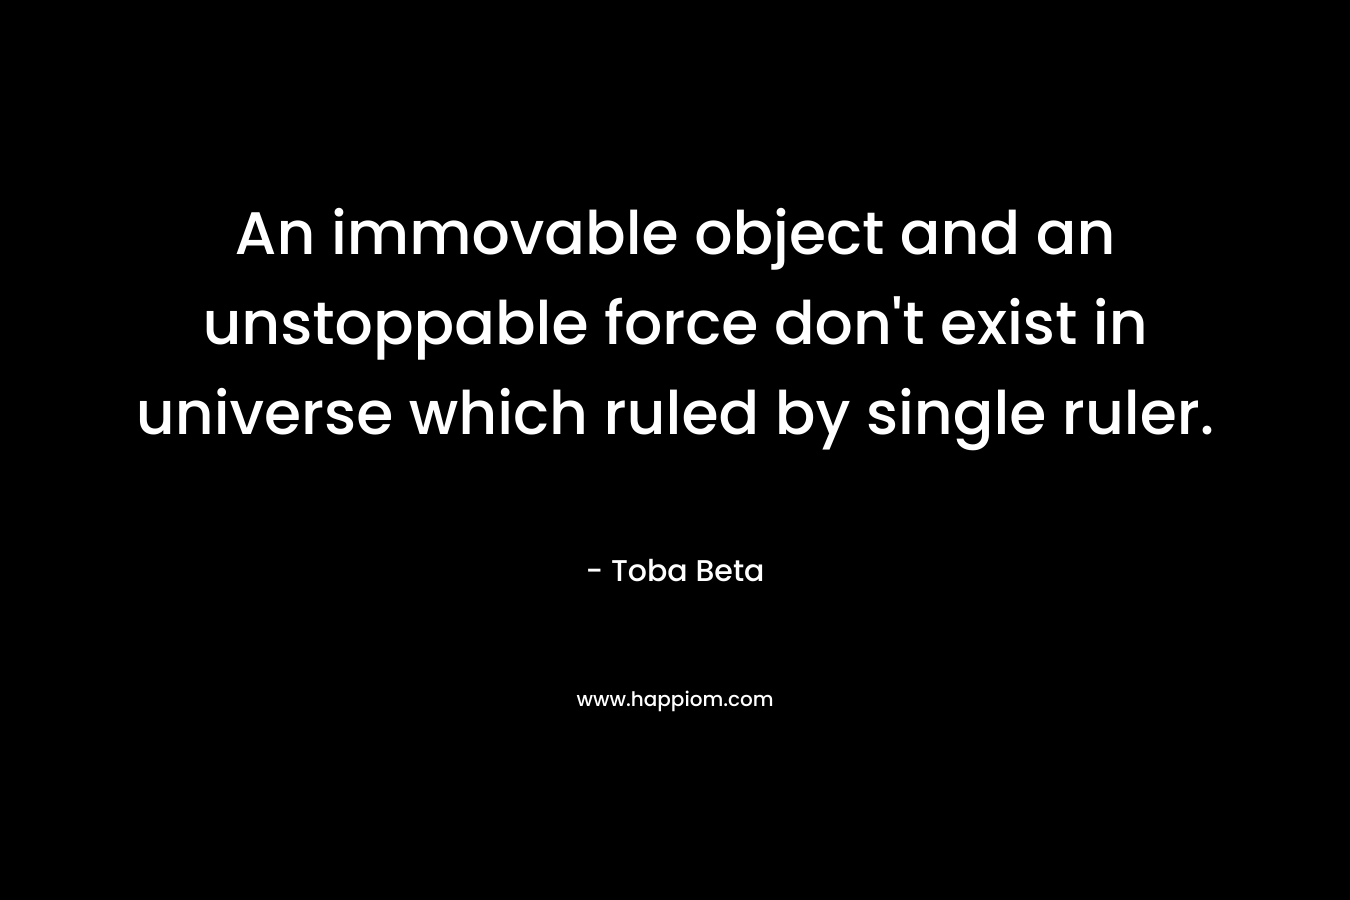 An immovable object and an unstoppable force don't exist in universe which ruled by single ruler.